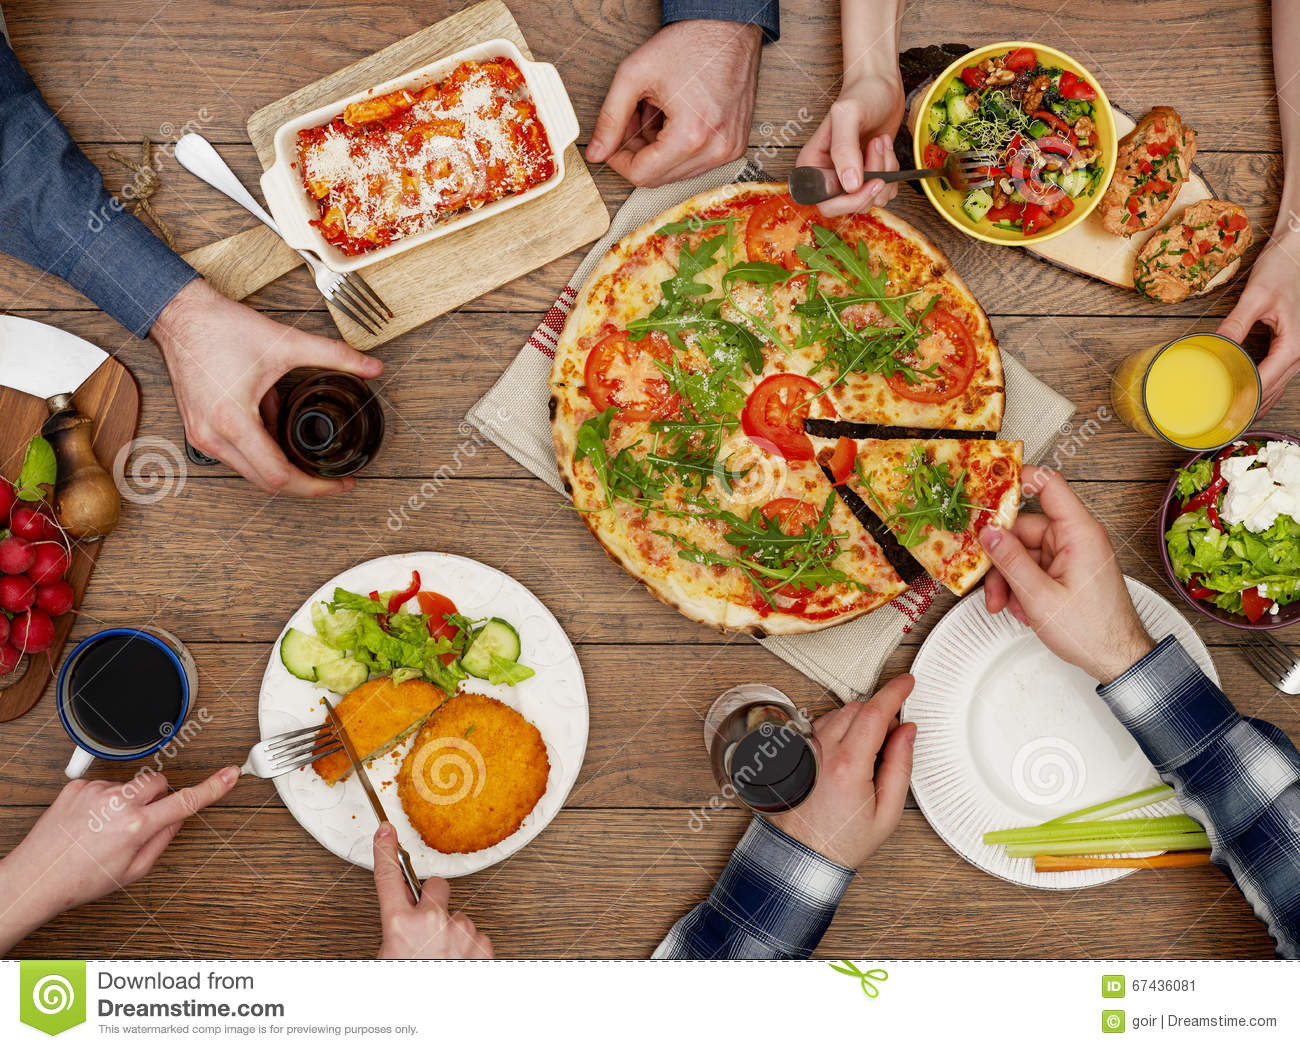 Food Ideas To Bring To A Party
 View From The Table Friends Eating Stock Image